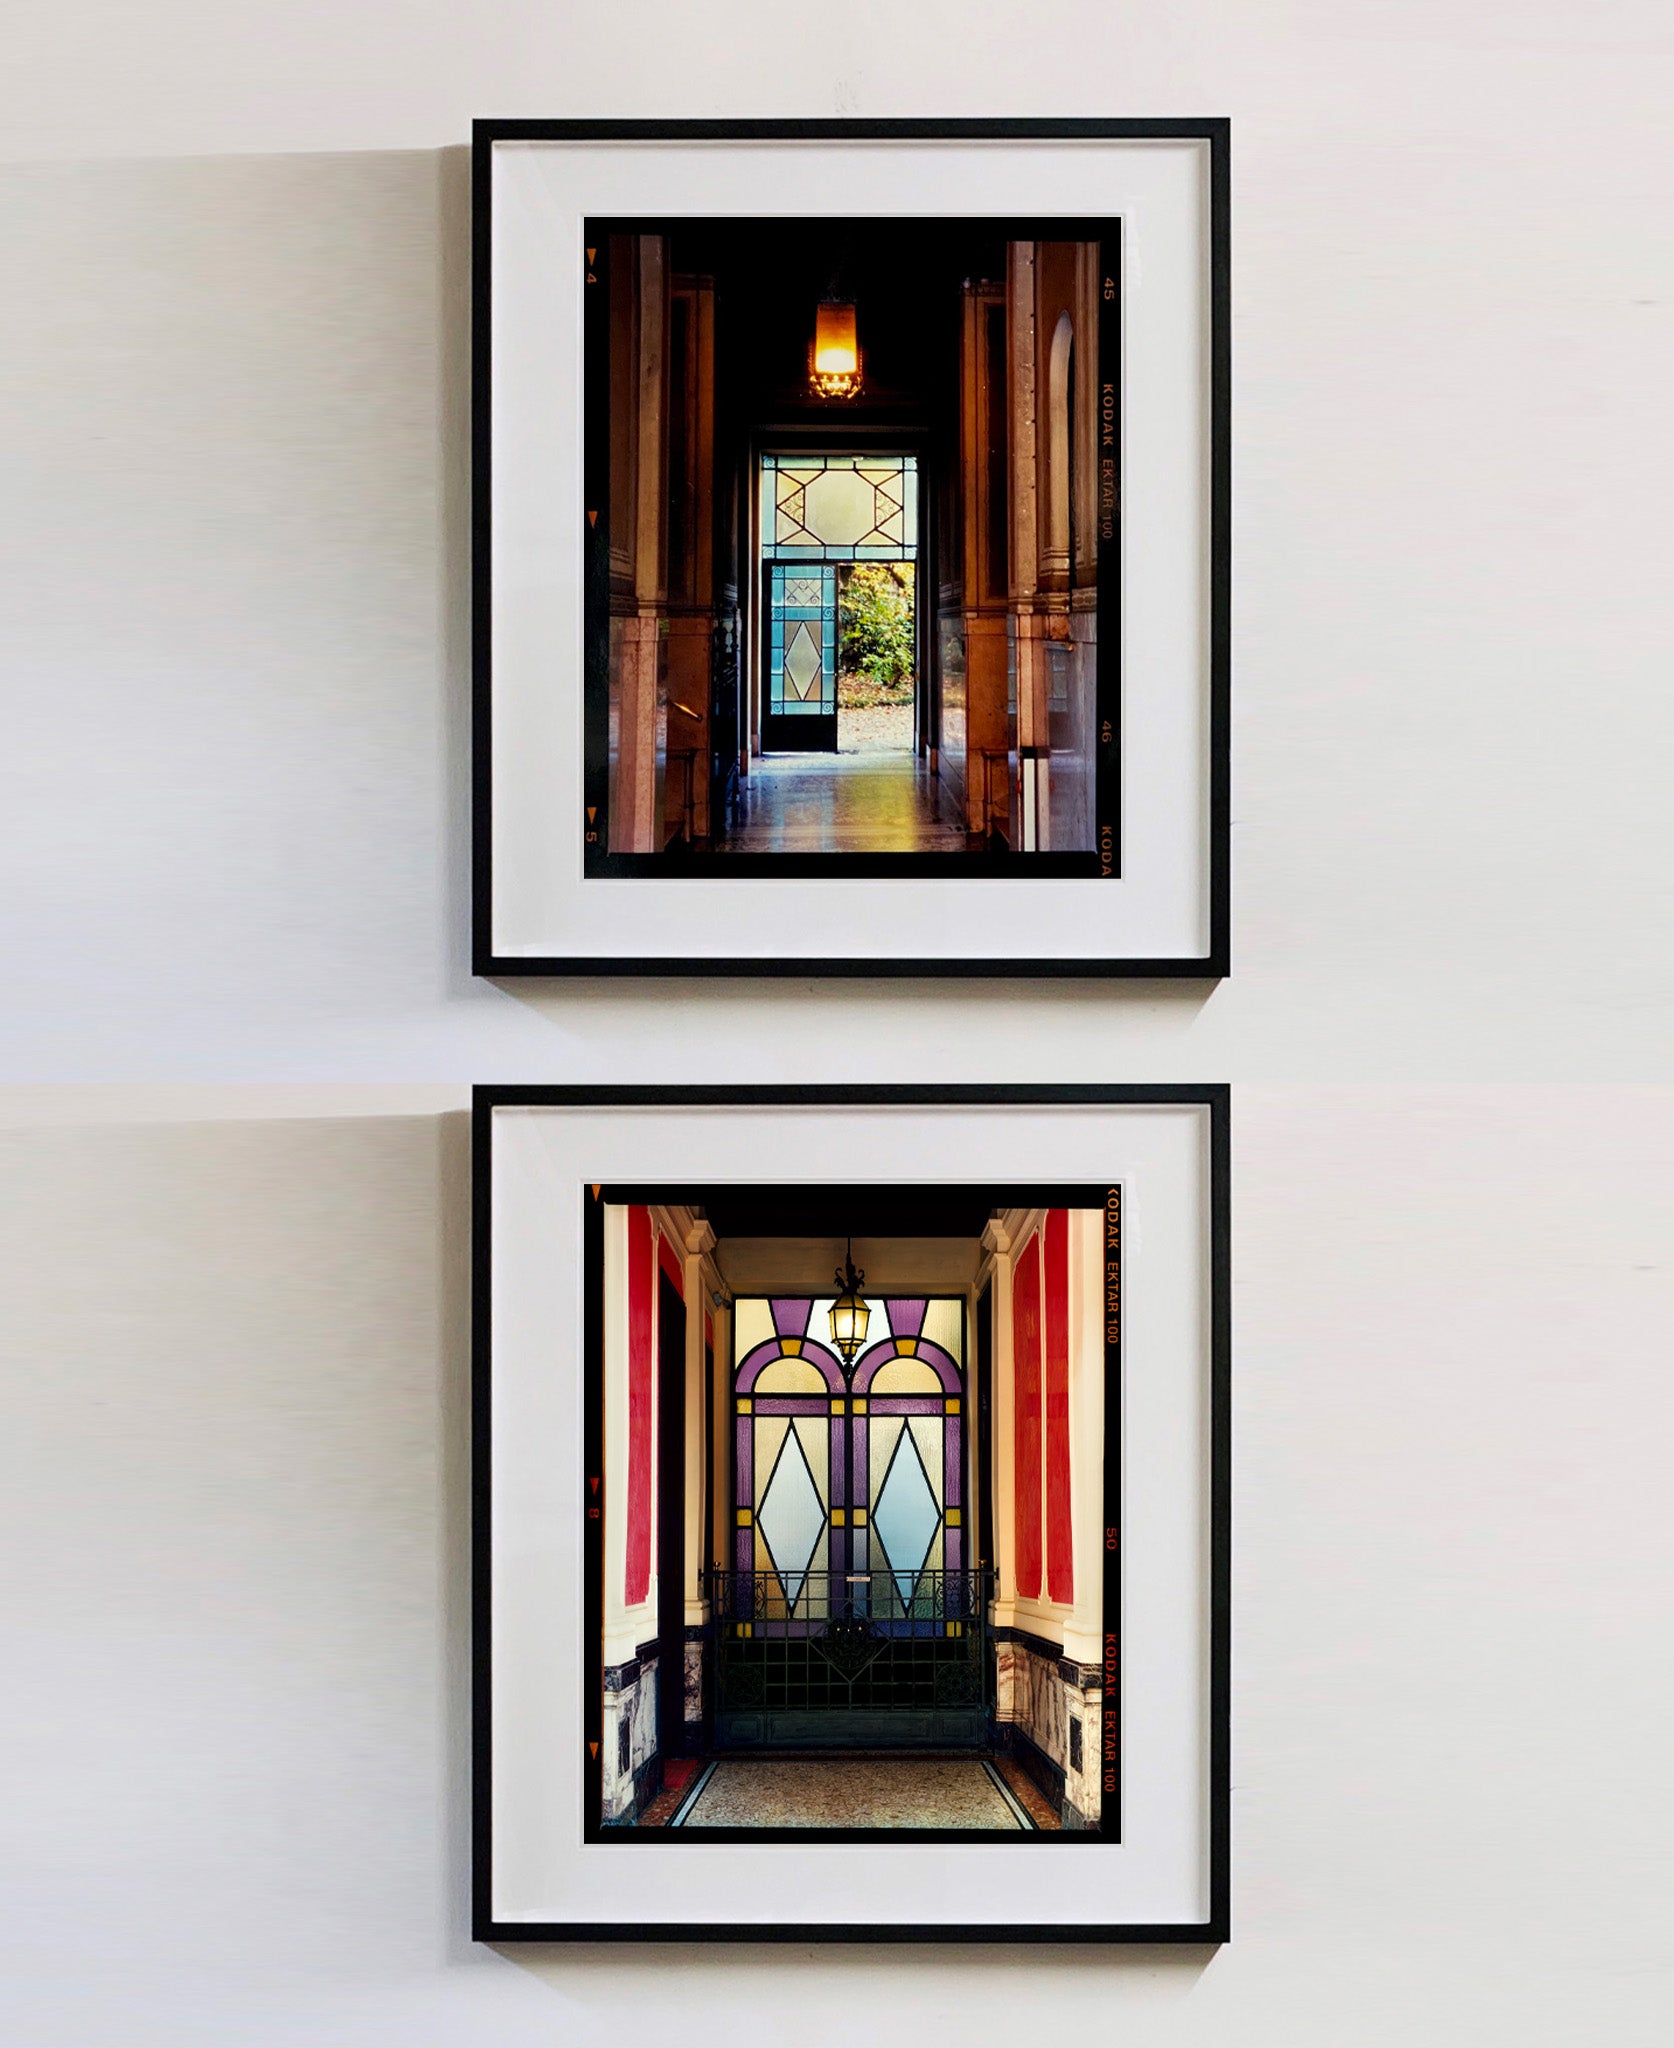 'Foyer VII' shows an Art Deco entrance hall in Milan, featuring stained glass panelling and marble flooring. This artwork is part of Richard Heeps' series 'A Short History of Milan', which began in November 2018 for a special project featuring at the Affordable Art Fair Milan 2019, and the series is ongoing. There is a reoccurring linear, structural theme throughout the series, capturing the Milanese use of materials in design such as glass, metal, wood and stone.